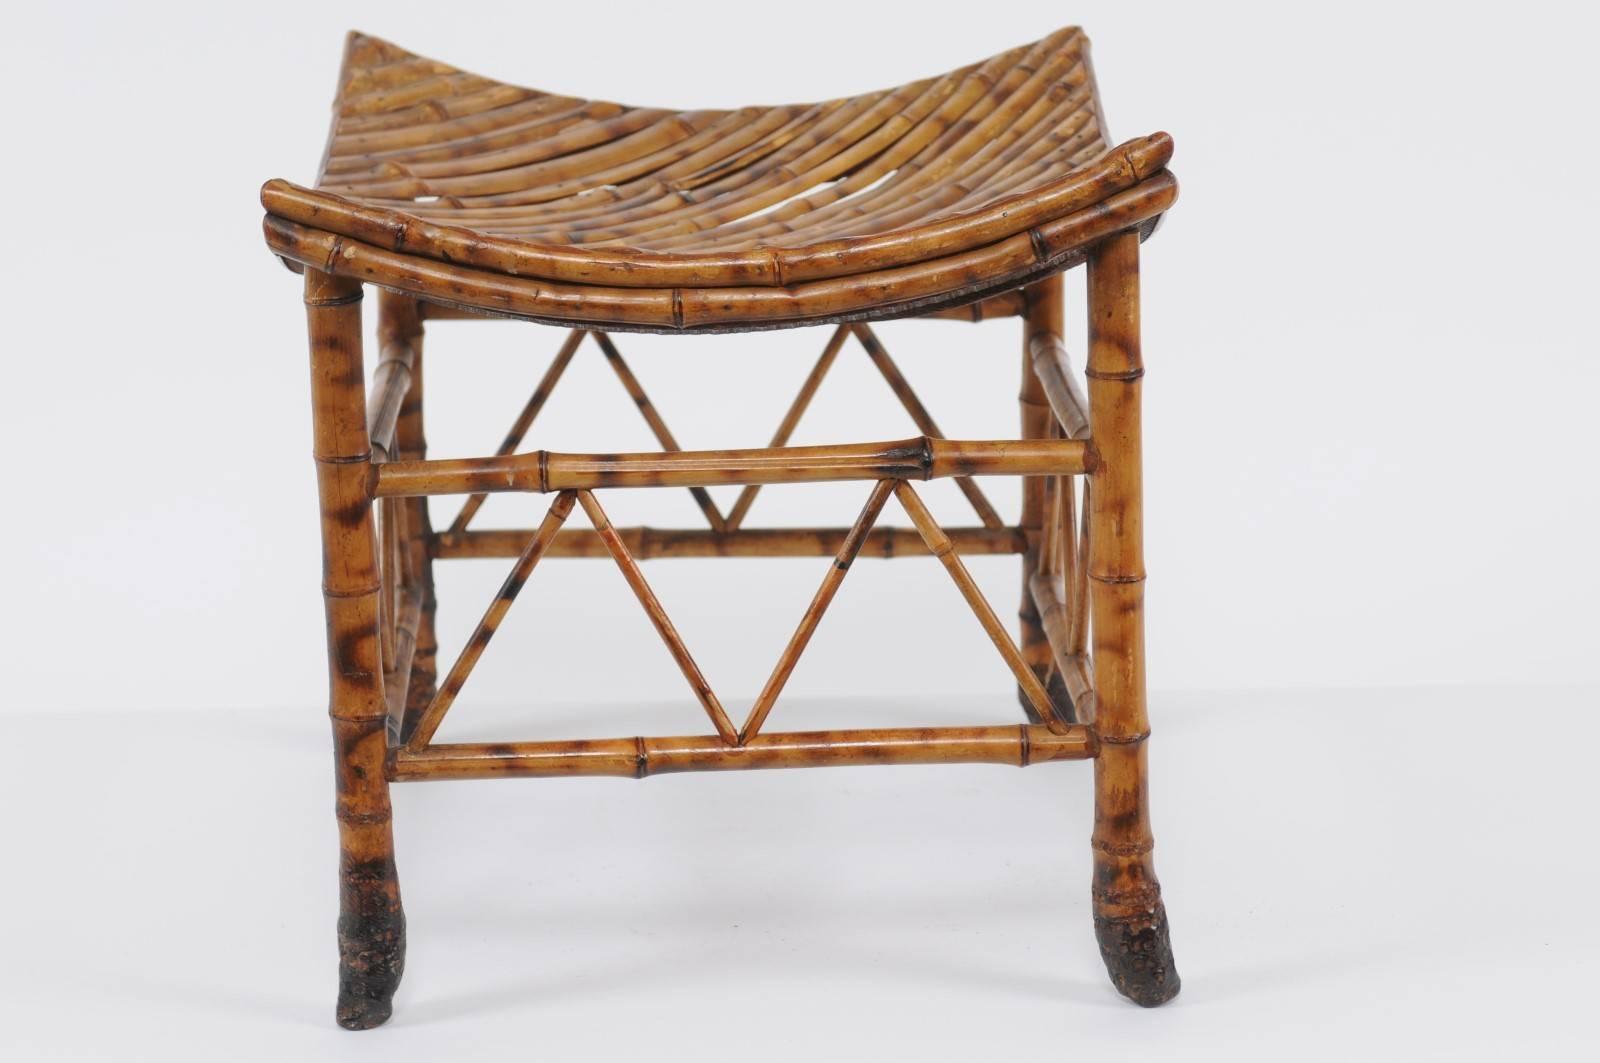 Egyptian Revival Thebes Bamboo Stool from Early 20th Century, England 3